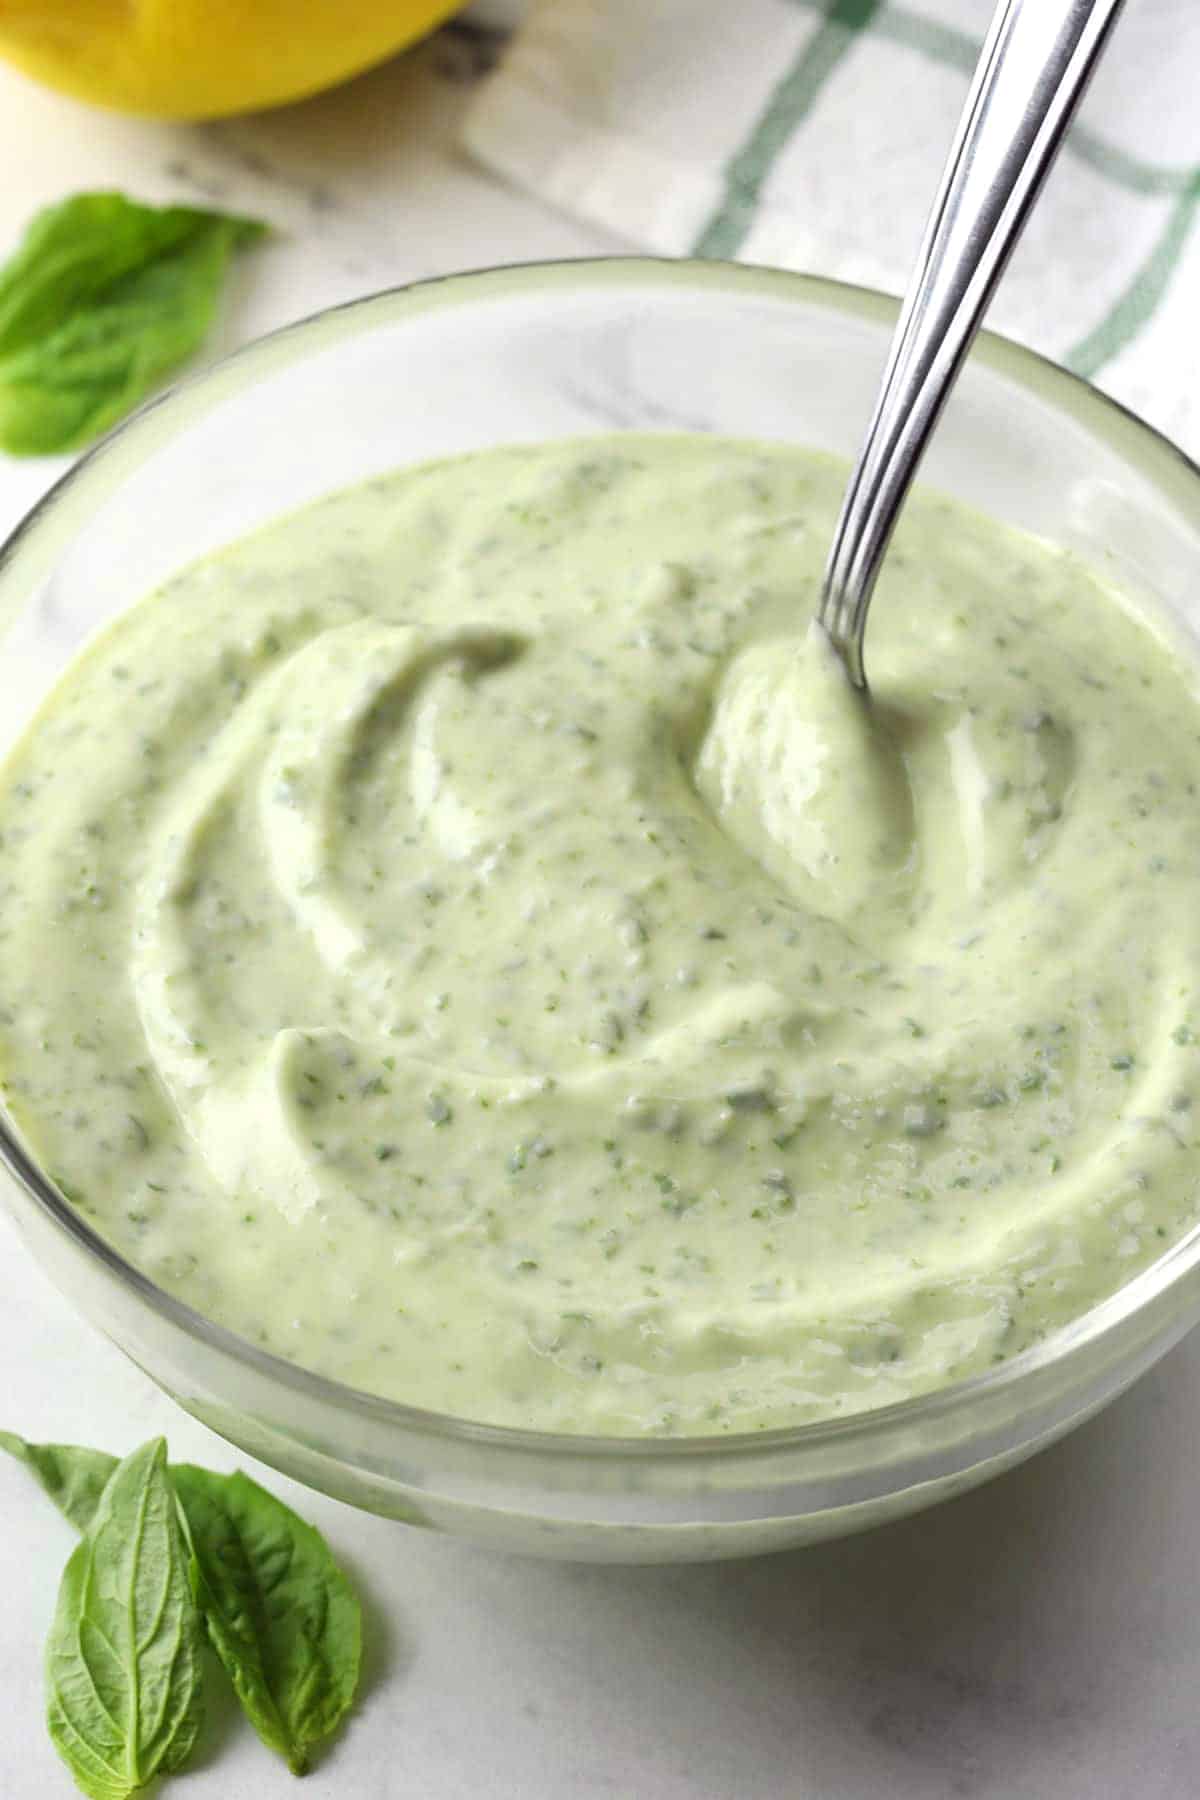 A glass bowl filled with basil aioli with a metal spoon.